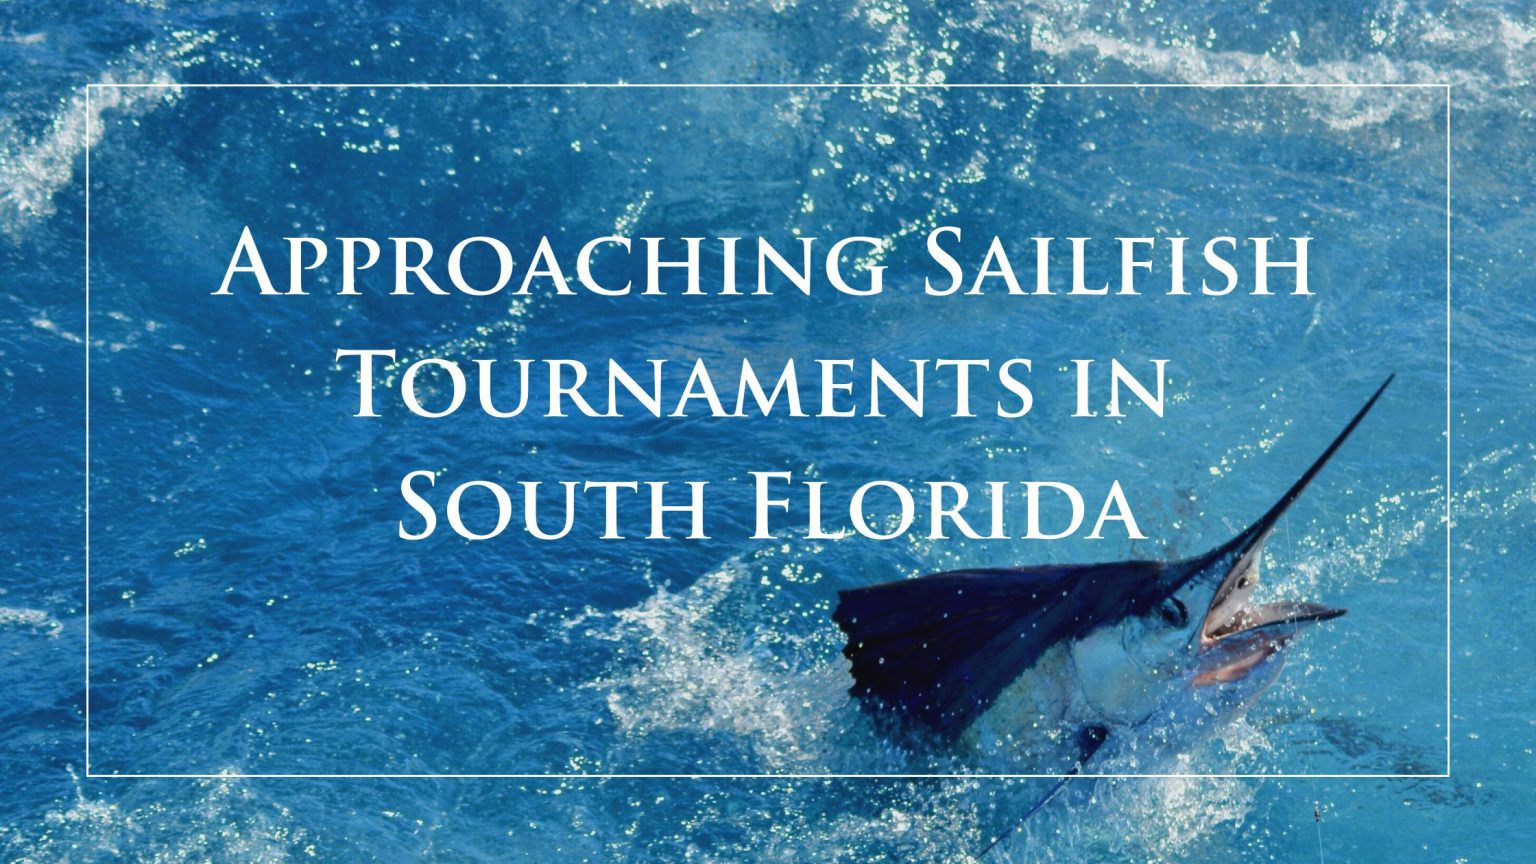 Approaching Sailfish Tournaments in South Florida HMY Yachts